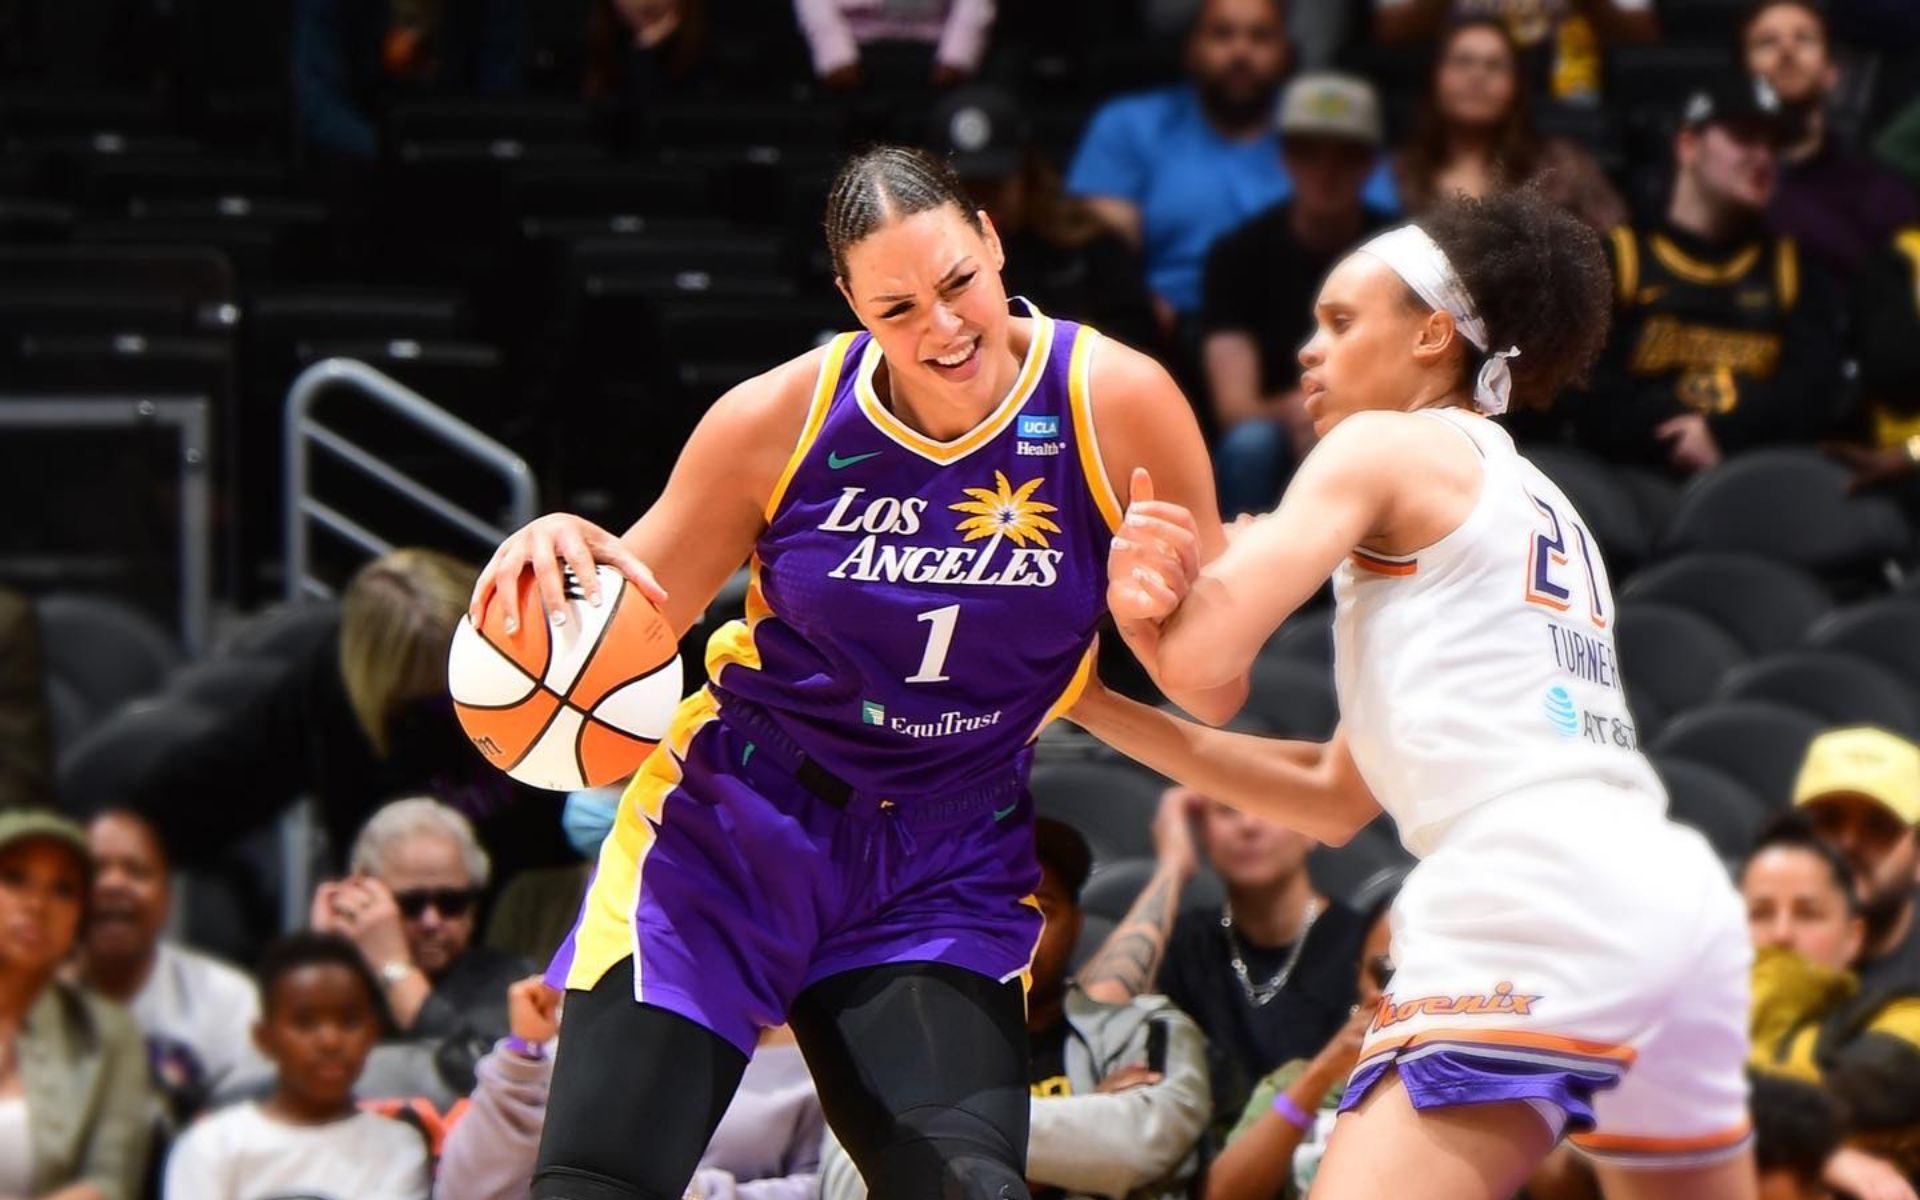 All-Star Liz Cambage to 'step away' from WNBA following LA Sparks departure